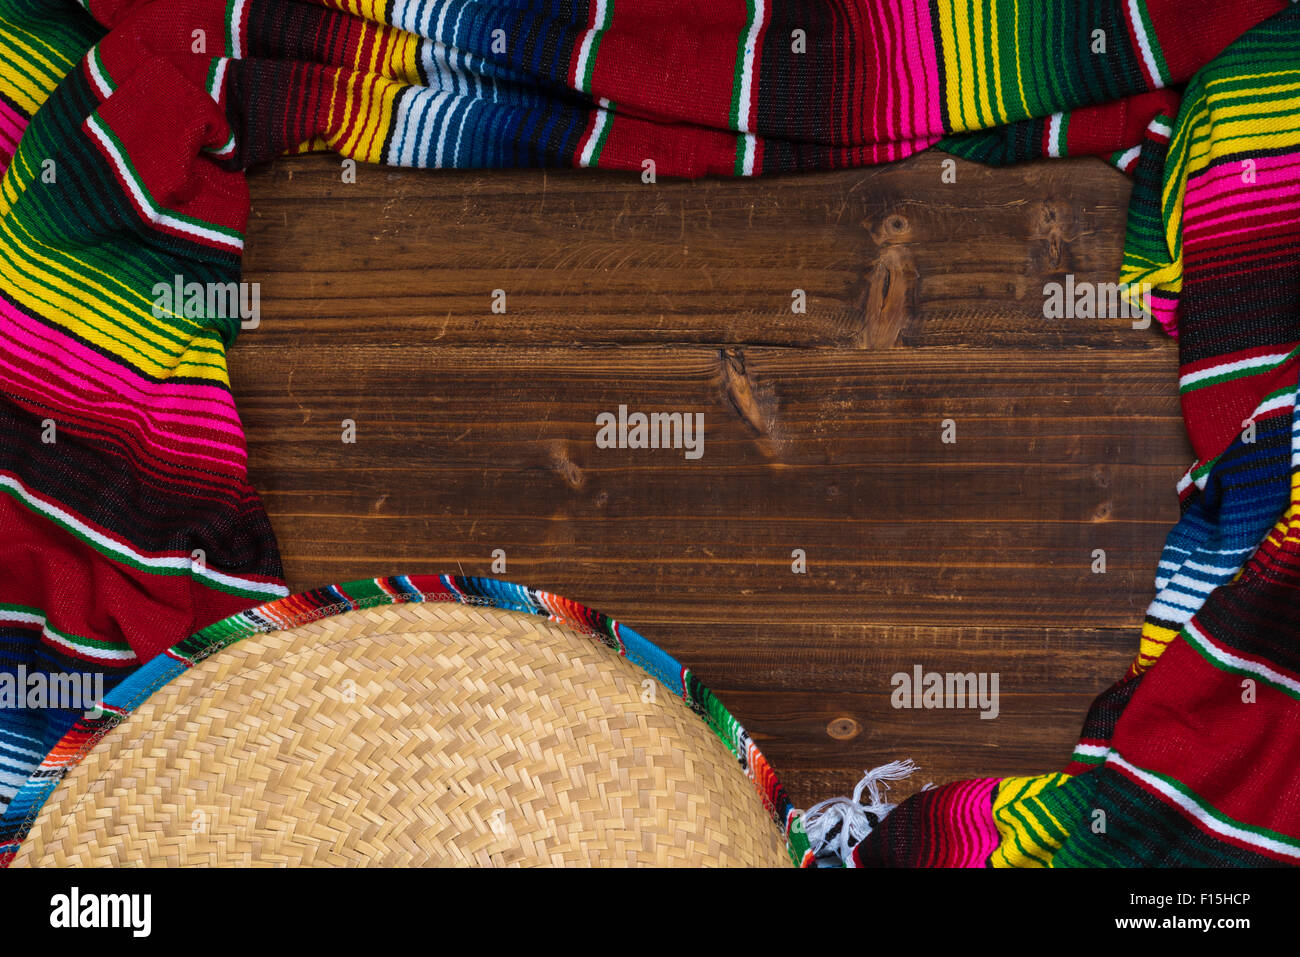 A traditional Mexican Sombrero and serape blanket on a wooden background with copy space Stock Photo